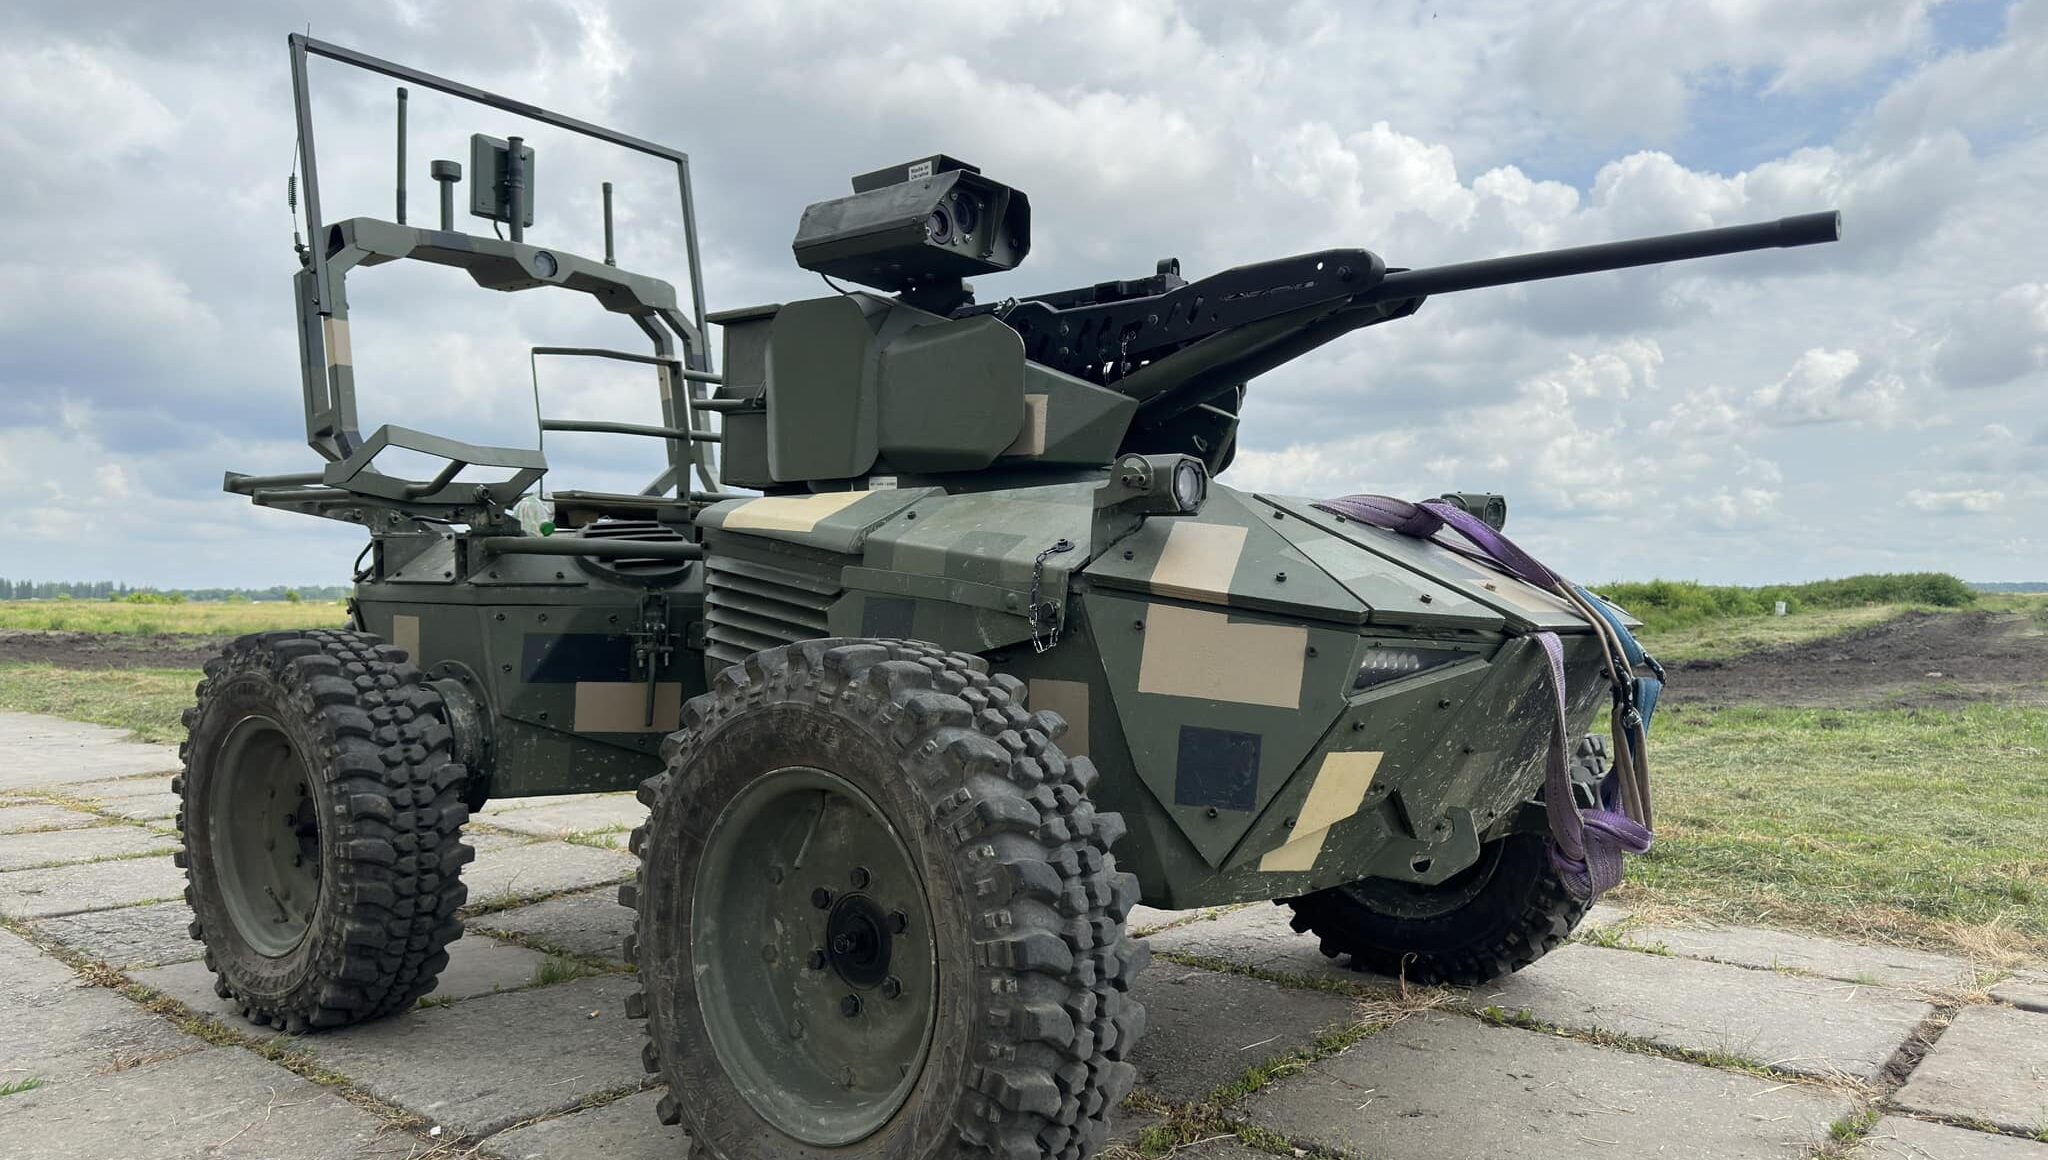 Ukraine’s new unmanned robot tested on front lines